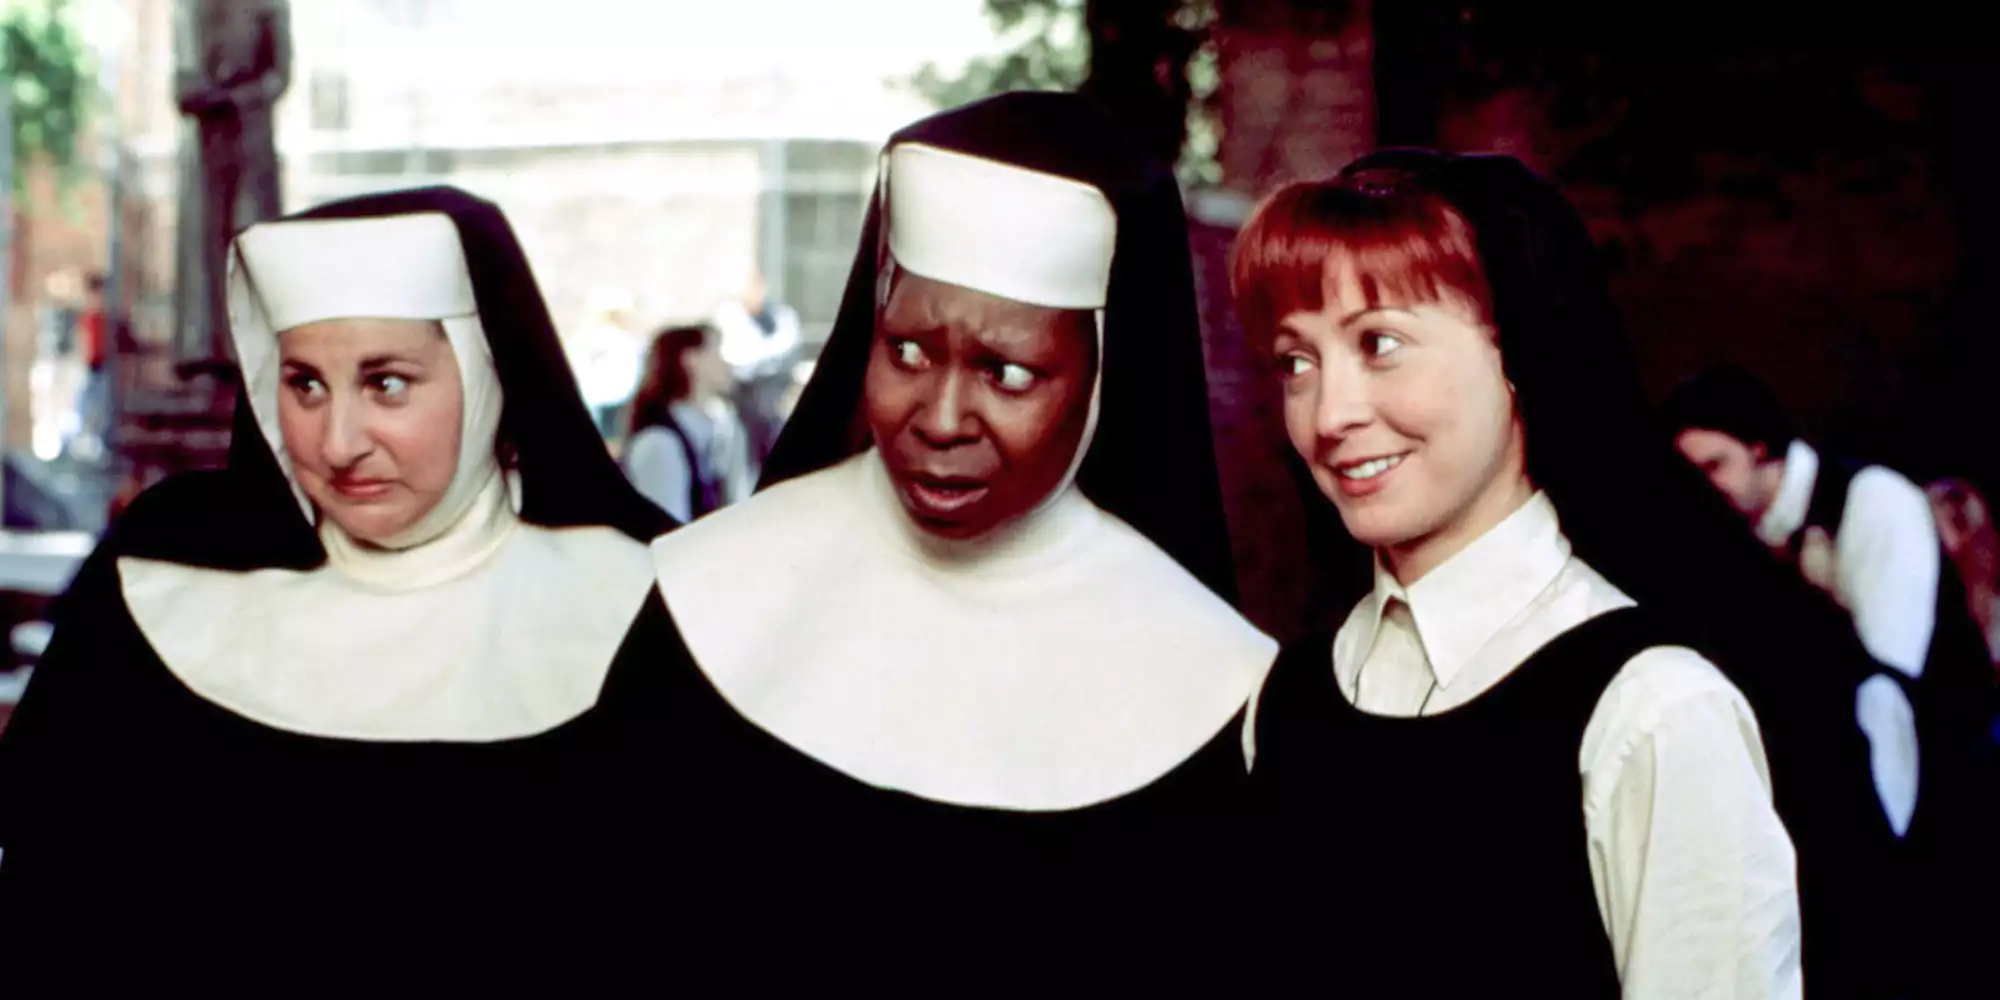 Screengrab from the 1992 film Sister Act, depicting (L to R) Kathy Najimy, Whoopi Goldberg, and Wendy Makkena